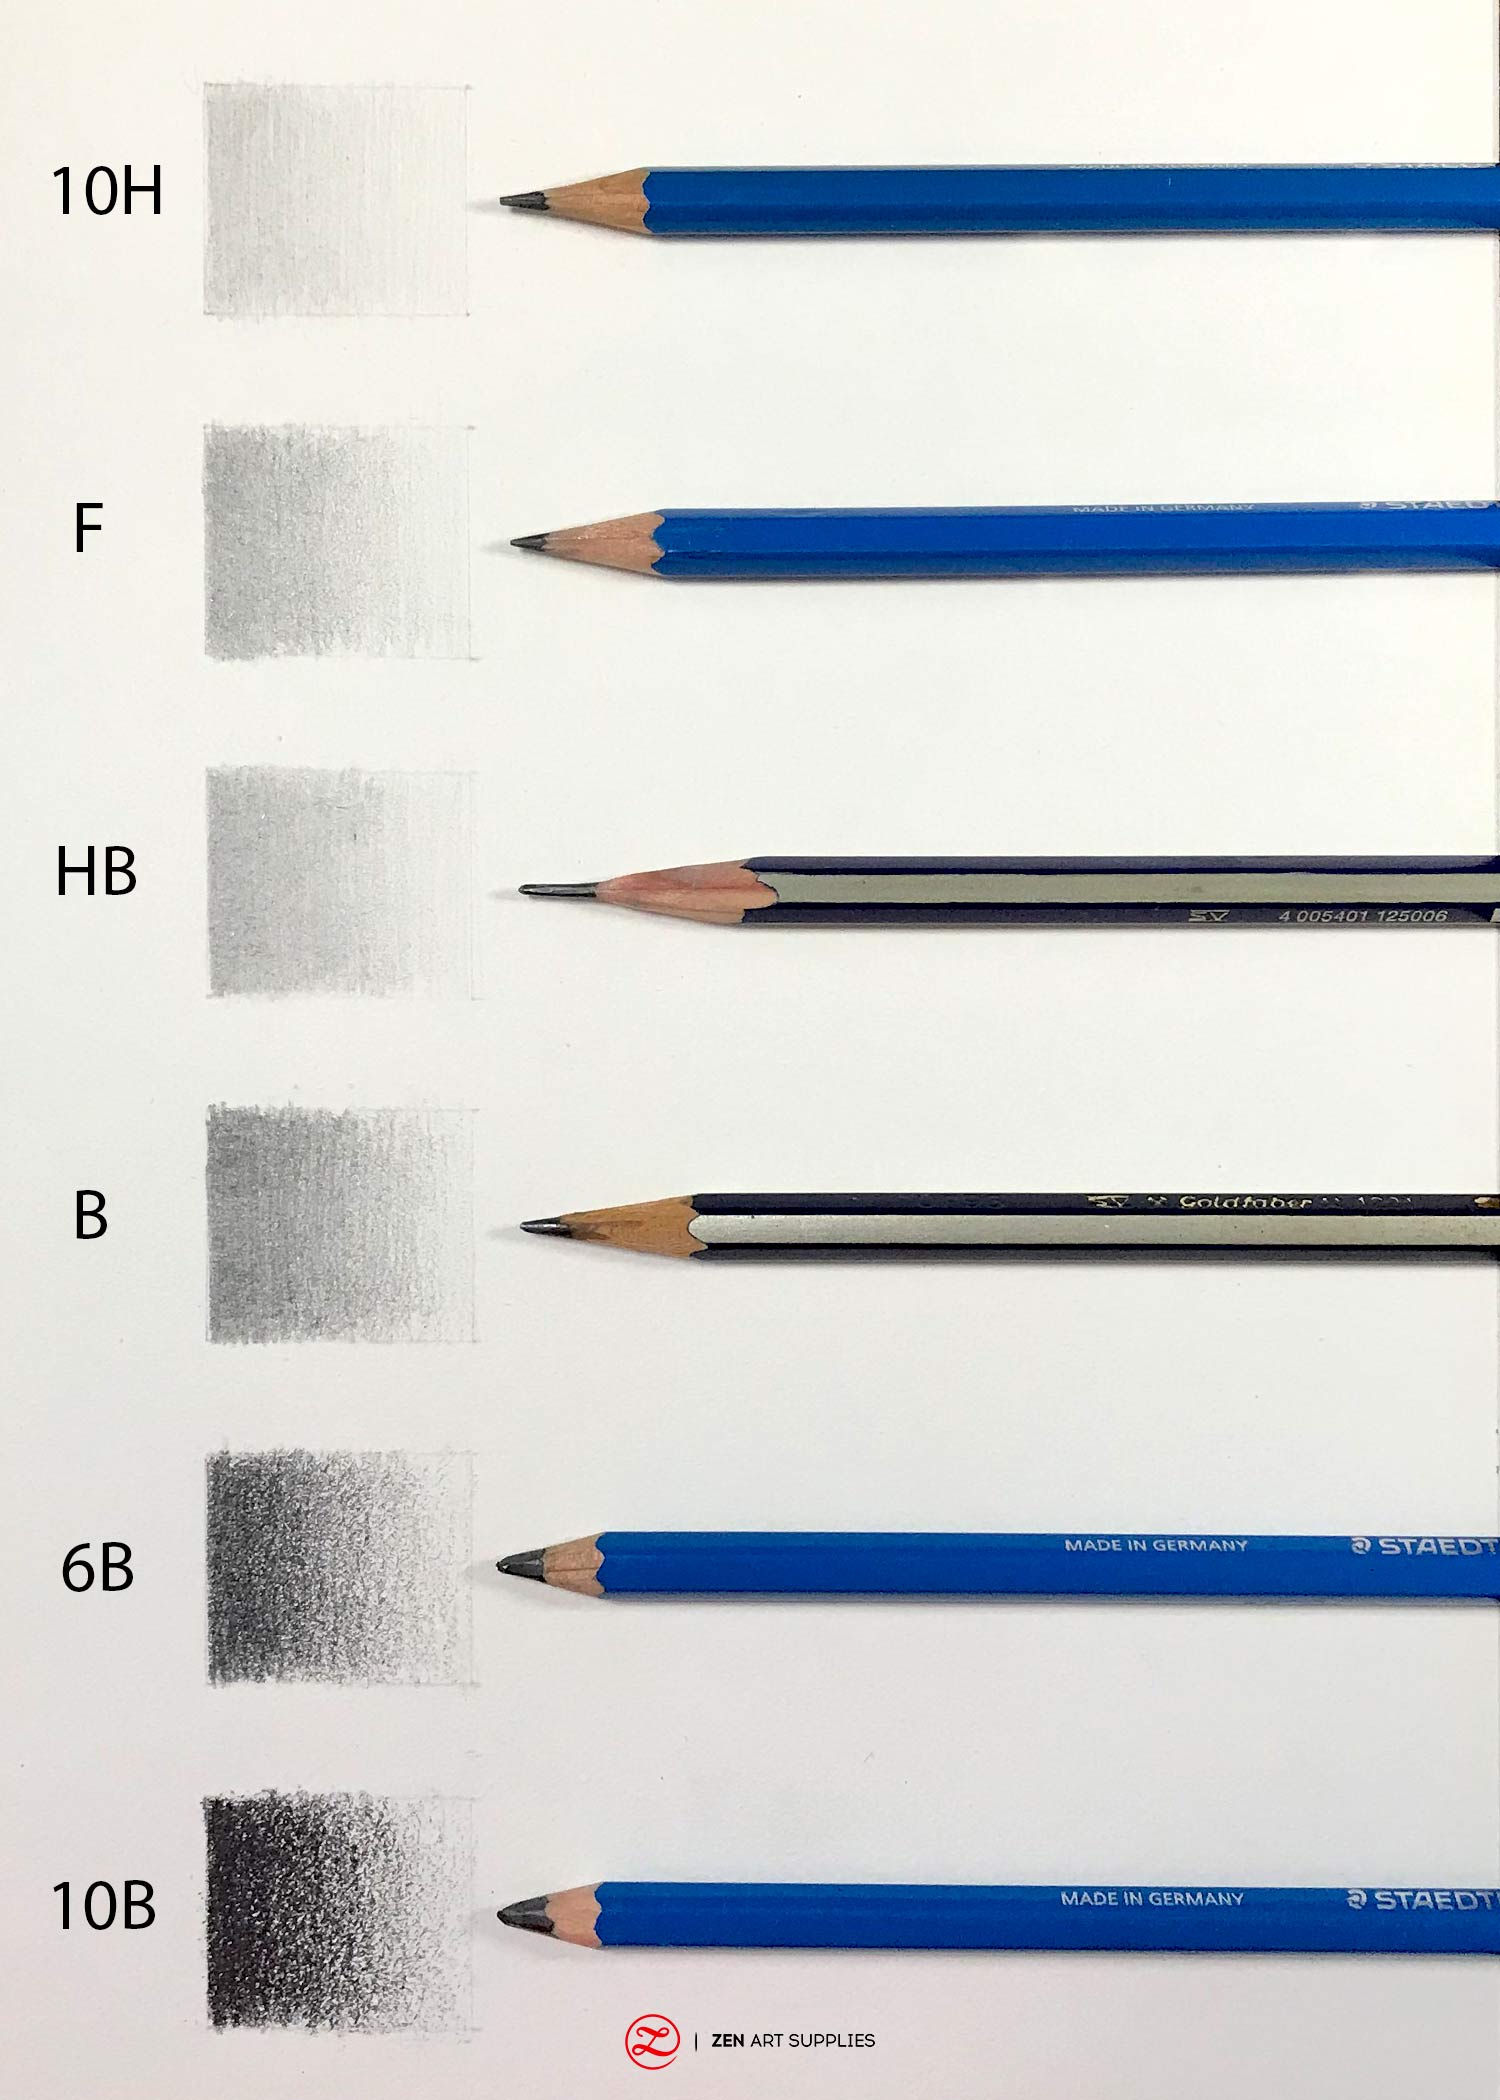 How to Sharpen a Drawing Pencil